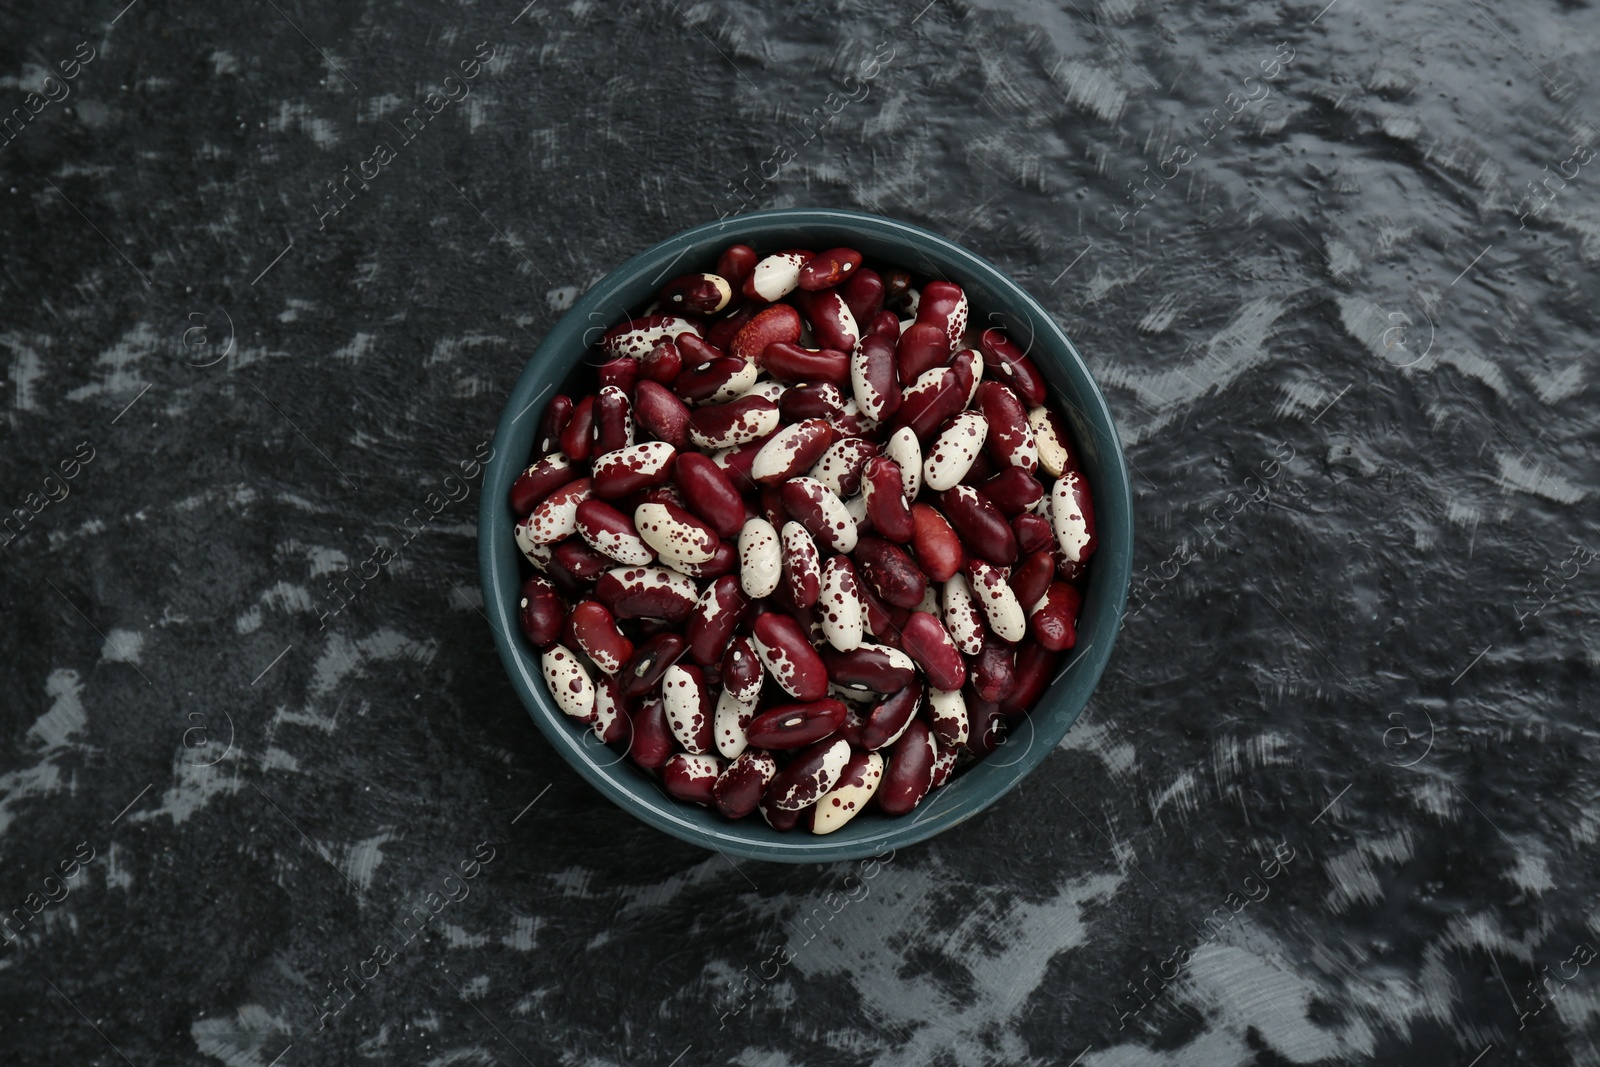 Photo of Bowl with dry kidney beans on black textured table, top view